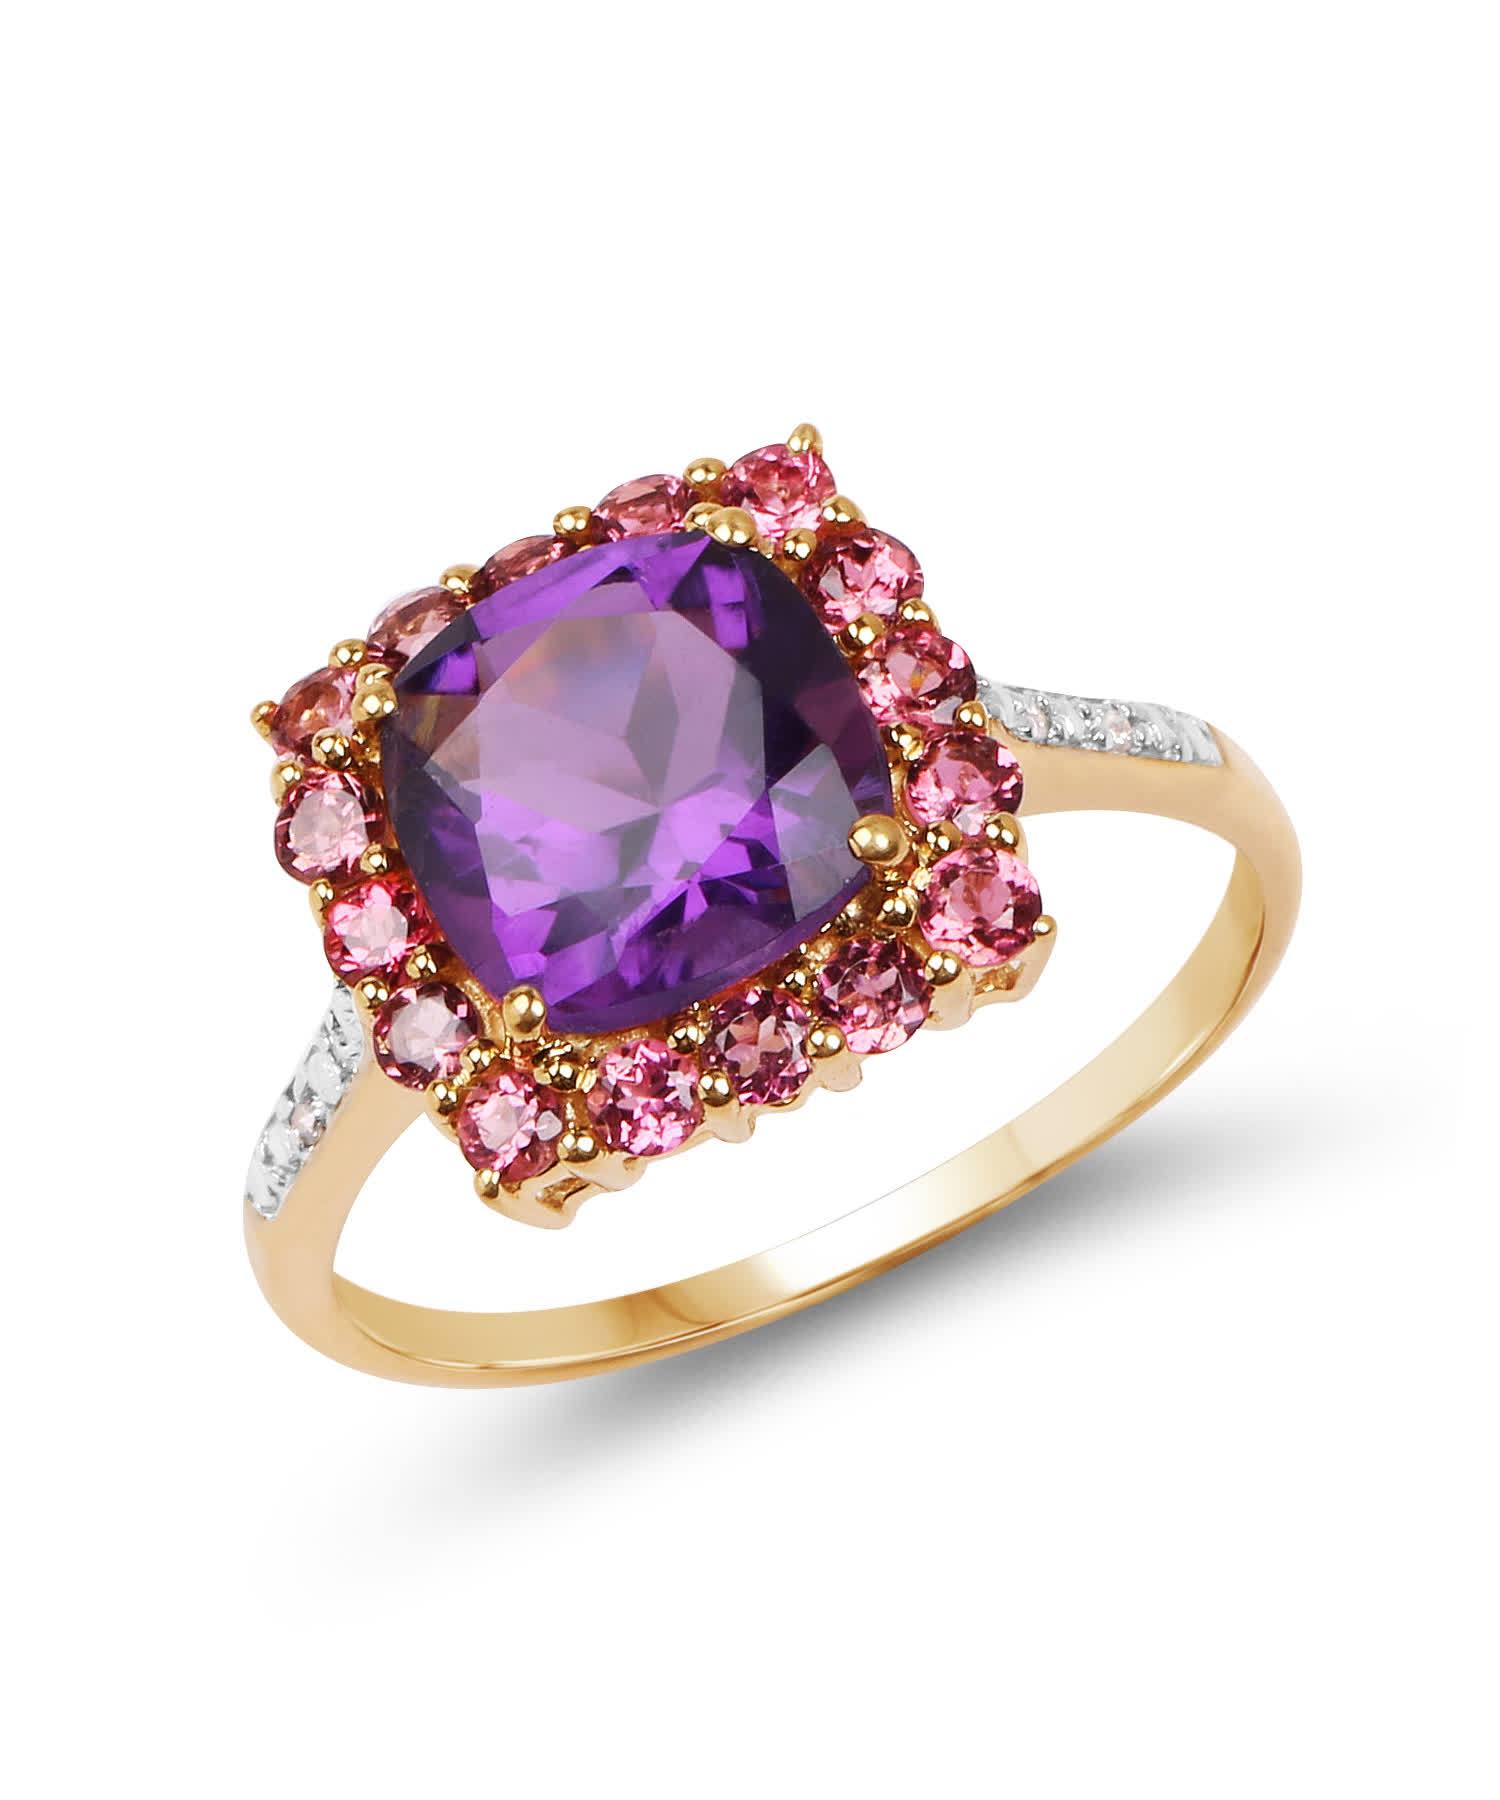 2.38ctw Natural Amethyst, Pink Tourmaline and Diamond 10k Gold Ring View 1